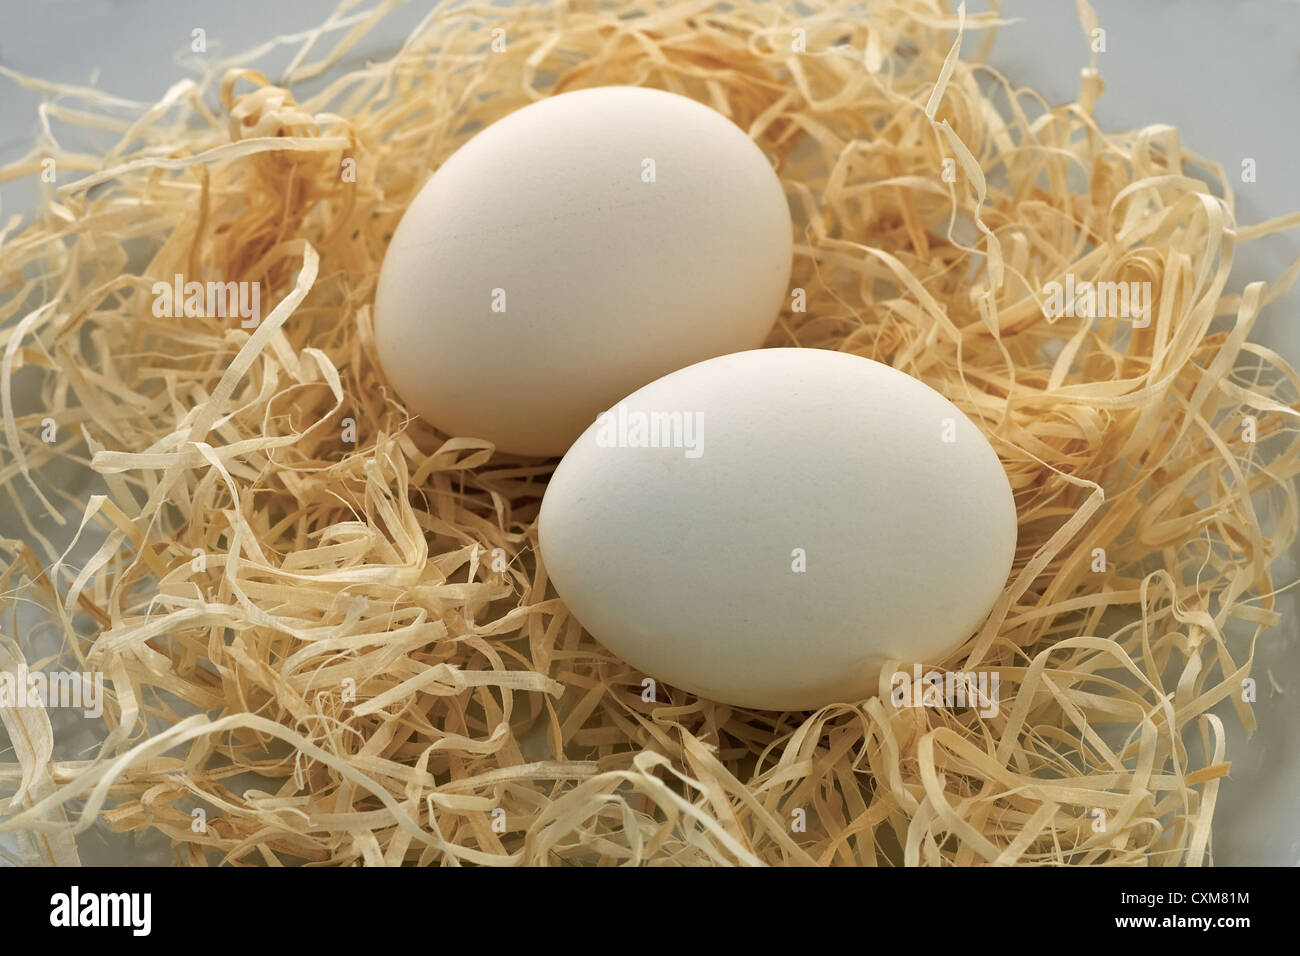 egg, shavings, straw, white, food, raw, ingredient, protein, boiled, albumen, fragile, concept, nutritious, natural, foodstuff, Stock Photo